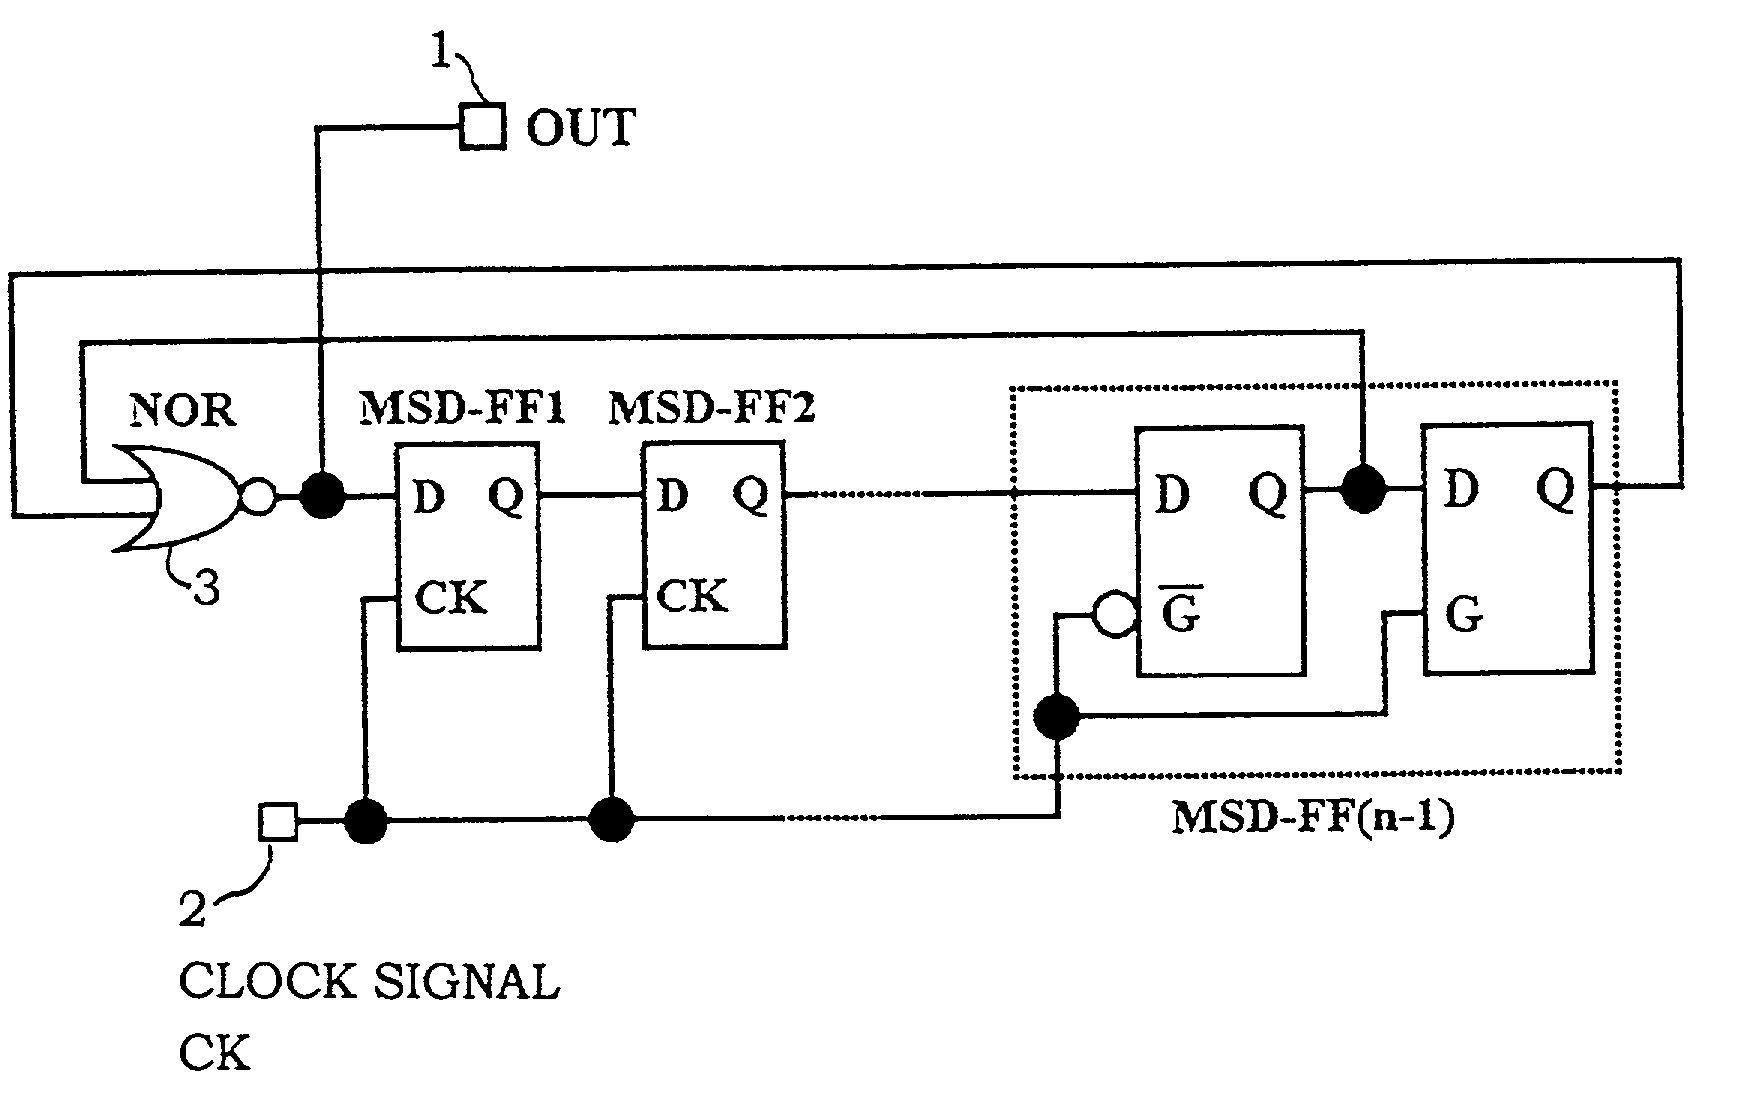 Odd -number factor frequency divider and 90o phase splitter which operates from output signal of the frequency divider